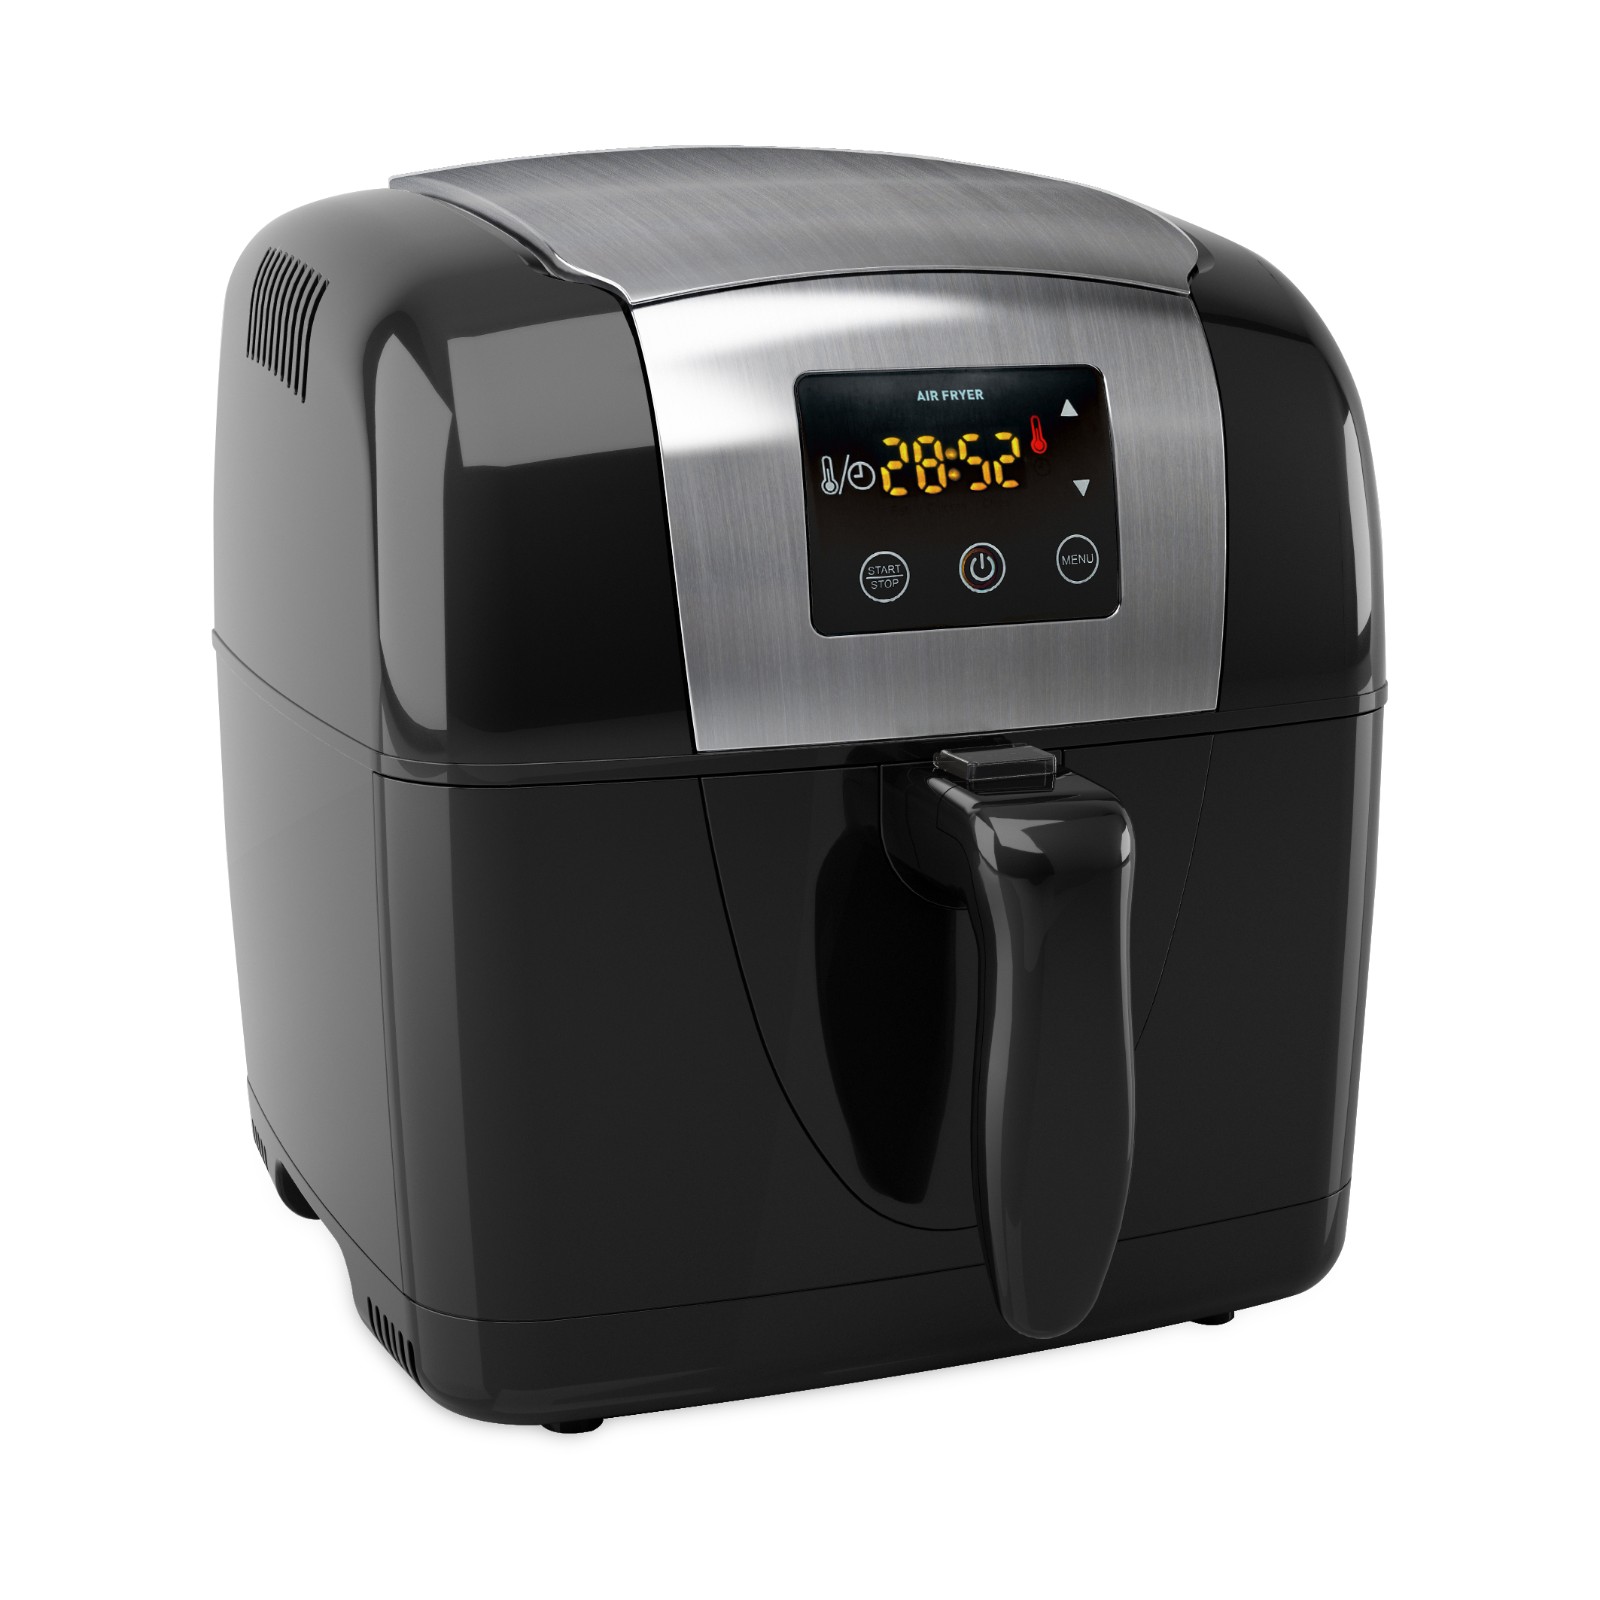 small home appliance air fryer air oven with 2.0L basket stainless steel housing touchable